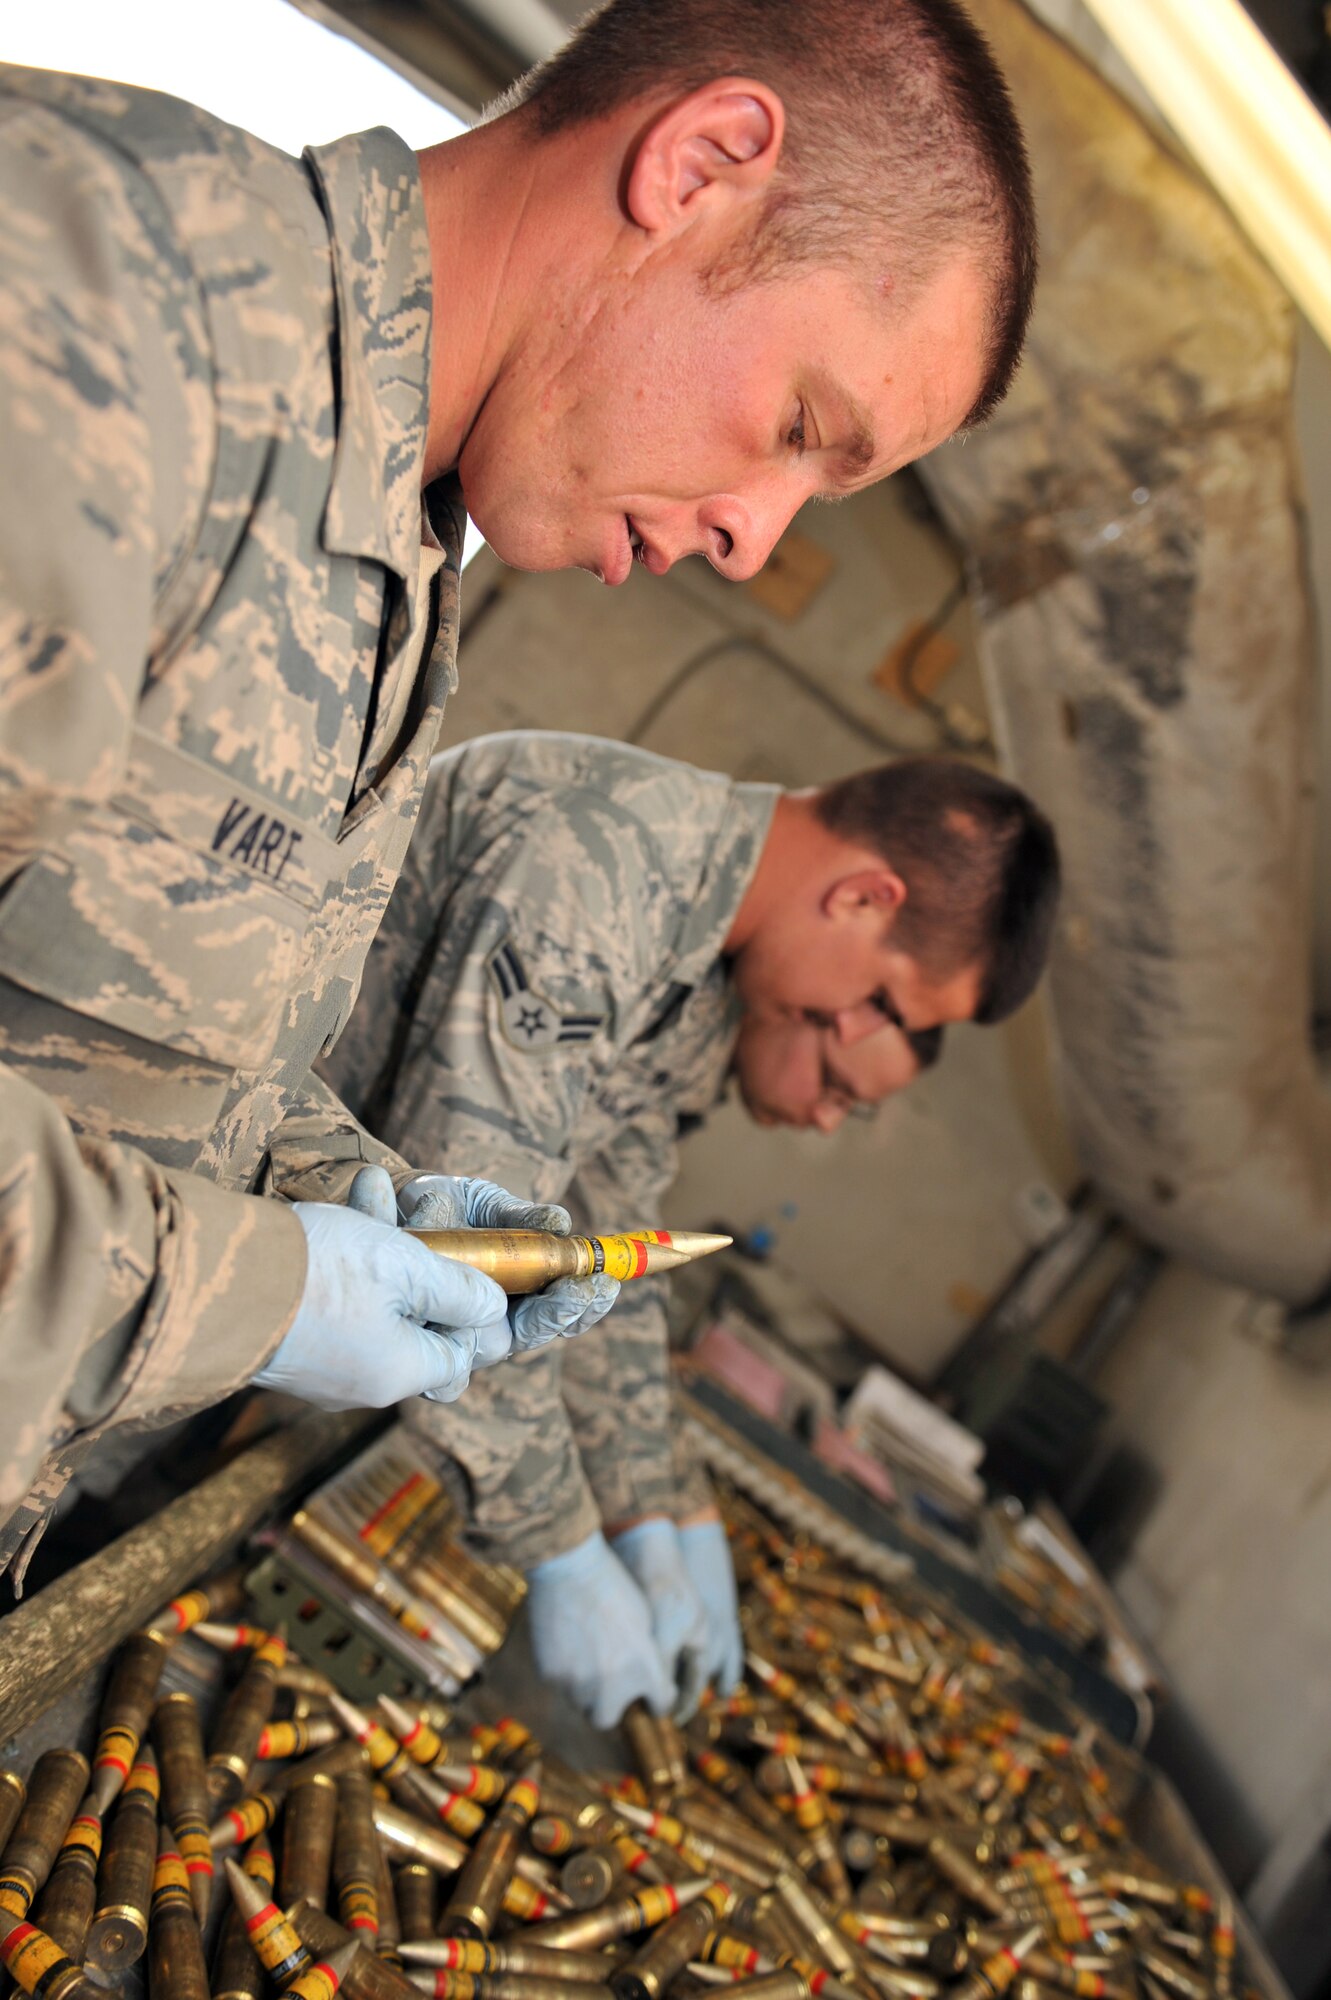 Staff Sgt. Glen Vart, 455th Expeditionary Maintenance Squadron Ammunition Supply Point technician, inspects 20 mm rounds to ensure they are serviceable at Bagram Airfield, Afghanistan, March 23, 2011. All ammunition must be inspected before being loaded to avoid deficient-round mishaps. (U.S. Air Force photo by Senior Airman Sheila deVera)